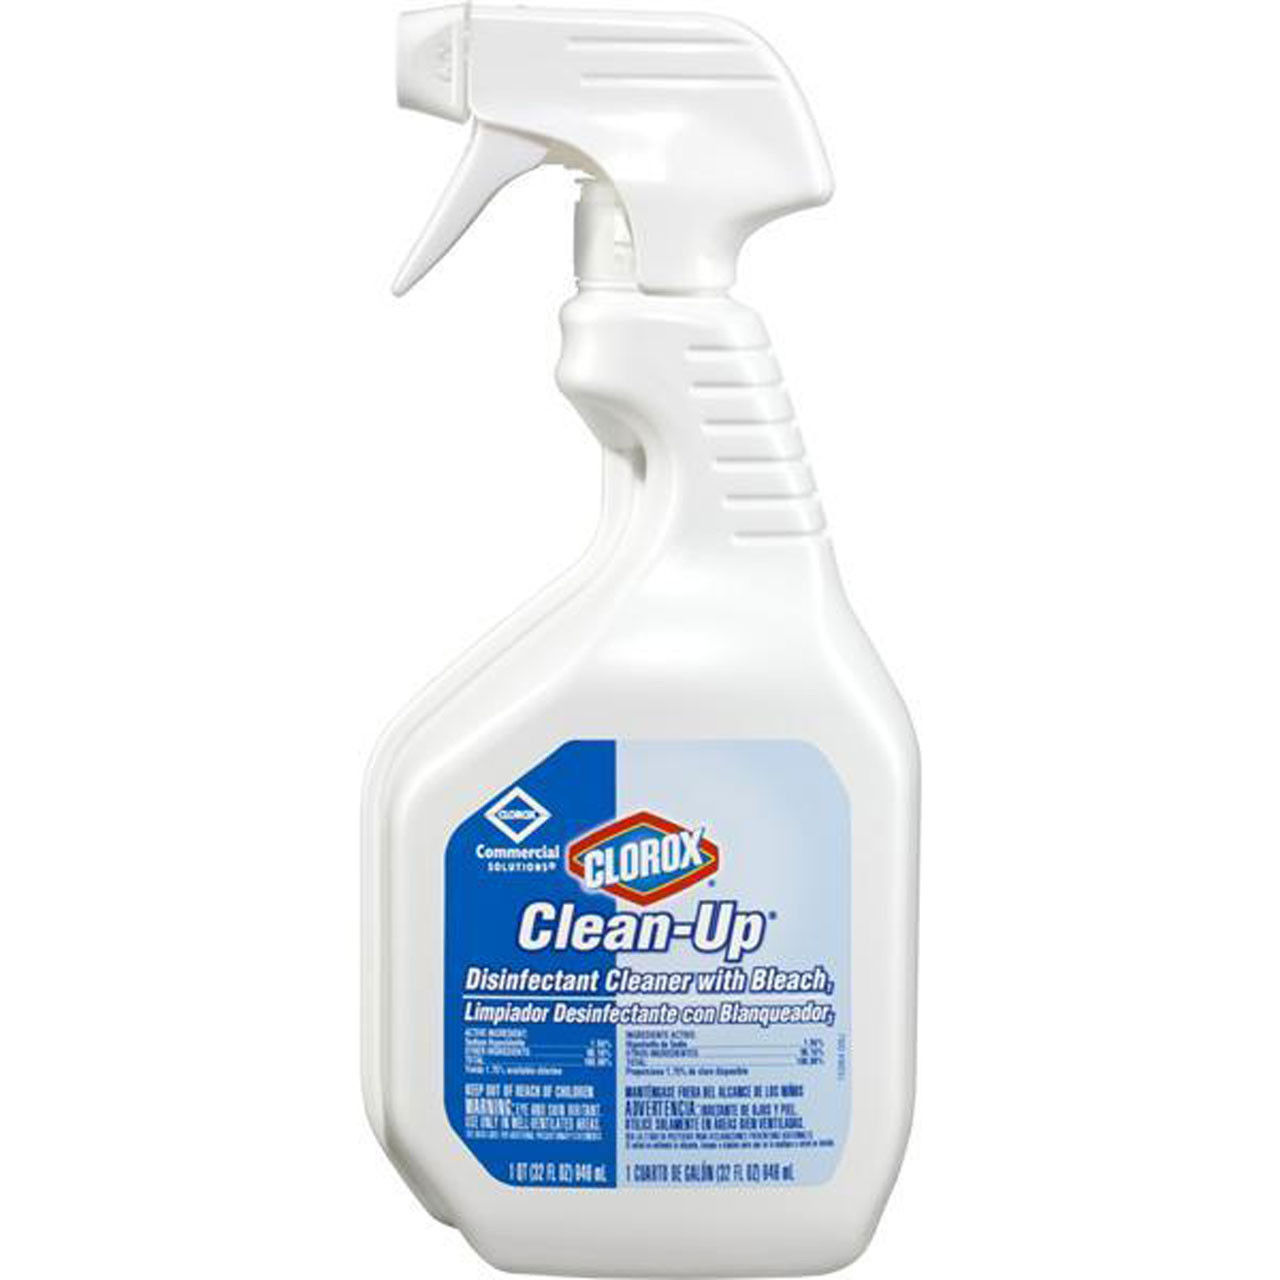 What are the size options for the Clorox Clean-Up Disinfectant Spray Cleaner With Bleach?